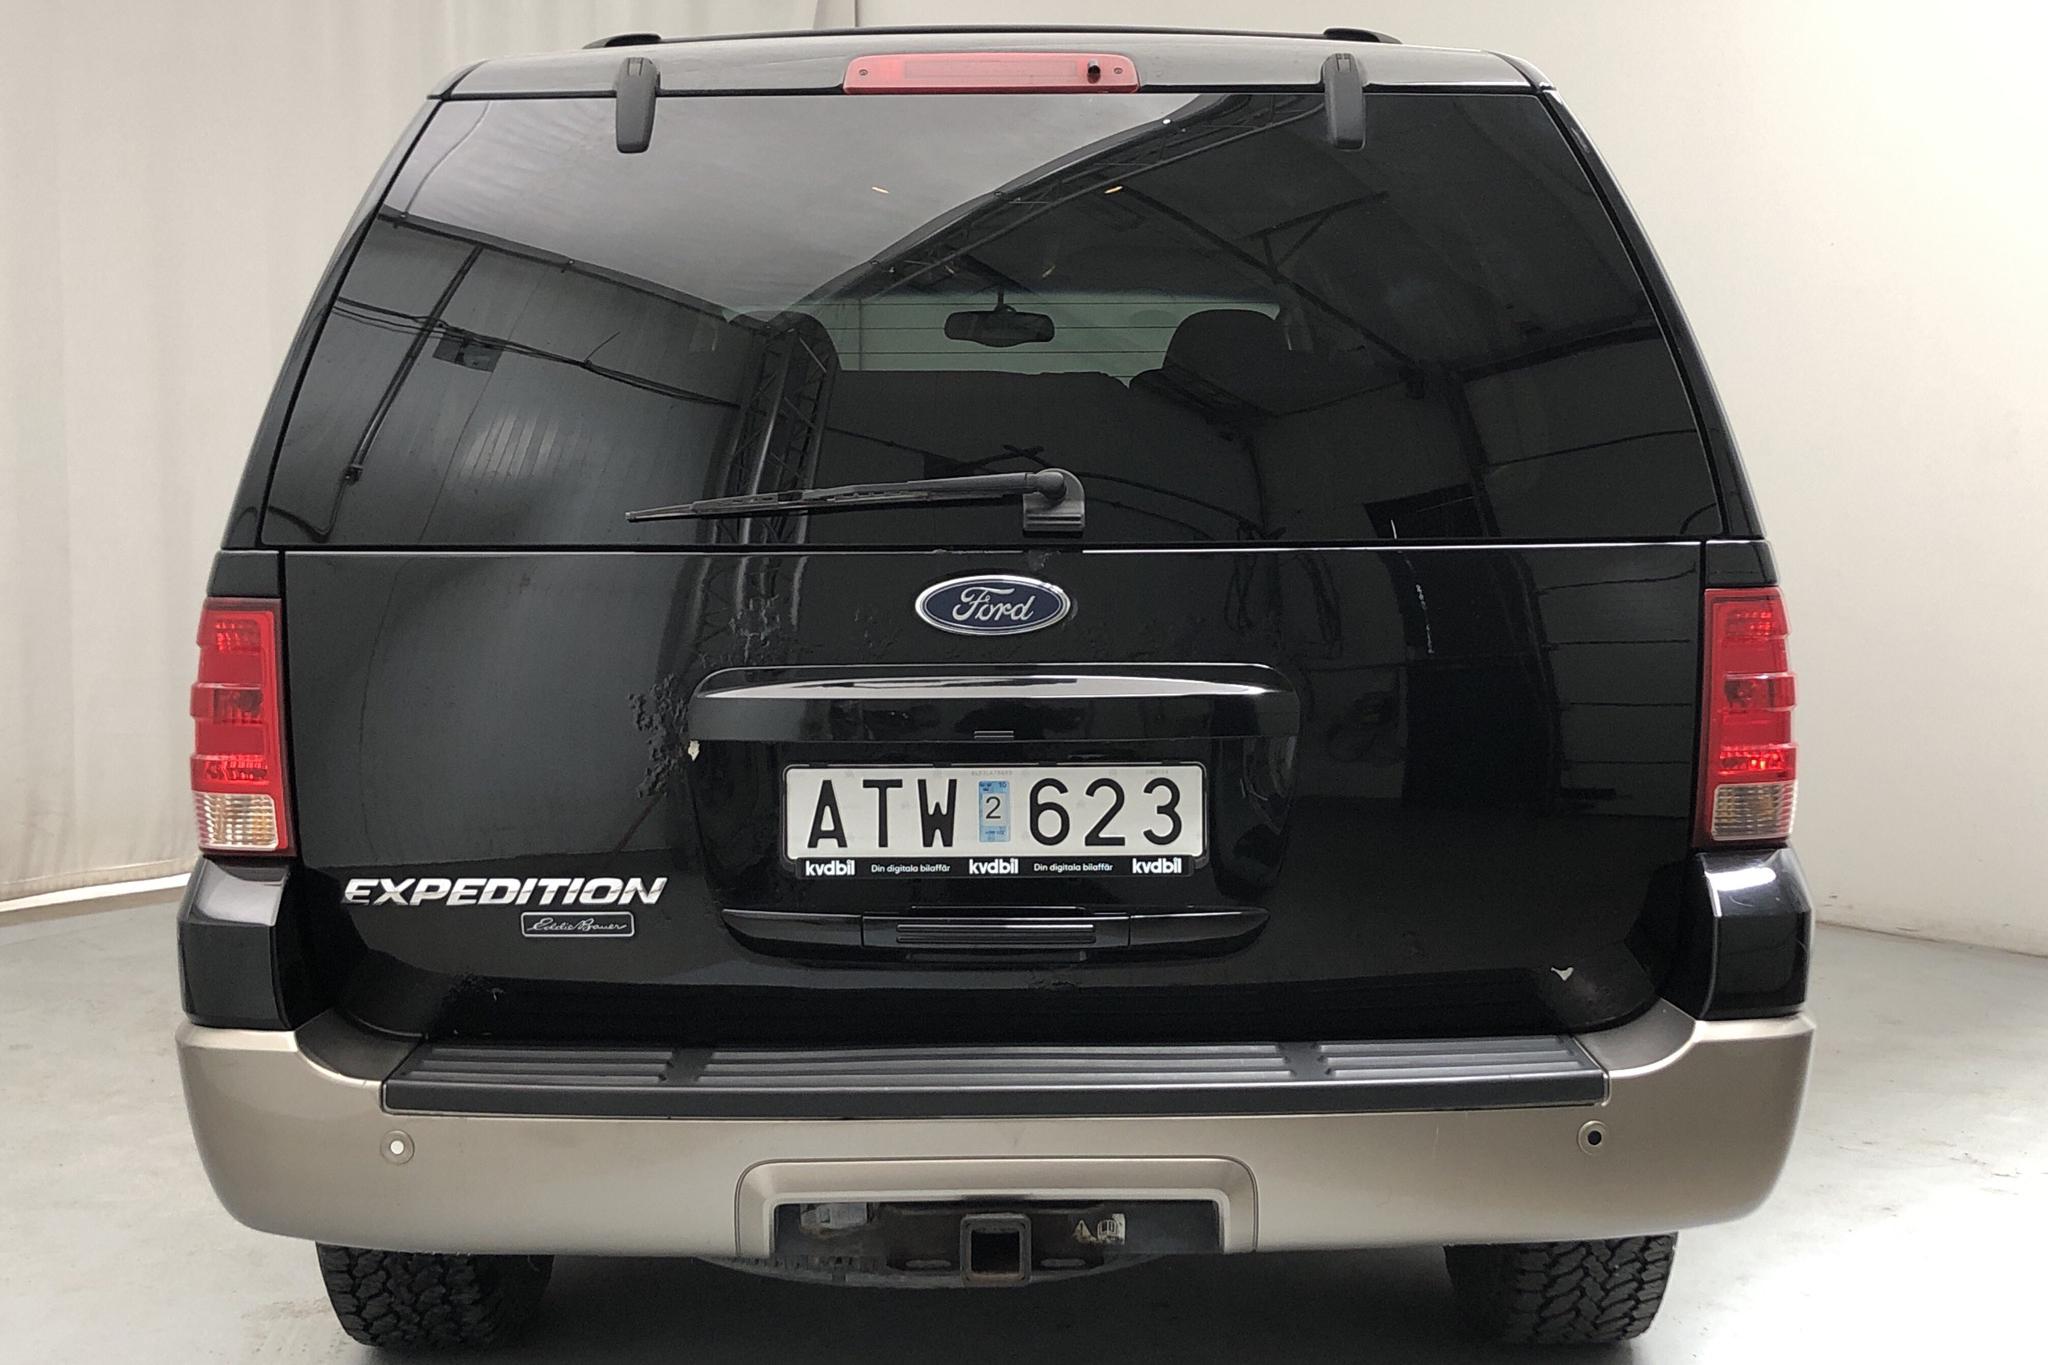 Ford Expedition 5.4 V8 (264hk) - 187 040 km - Automatic - black - 2003